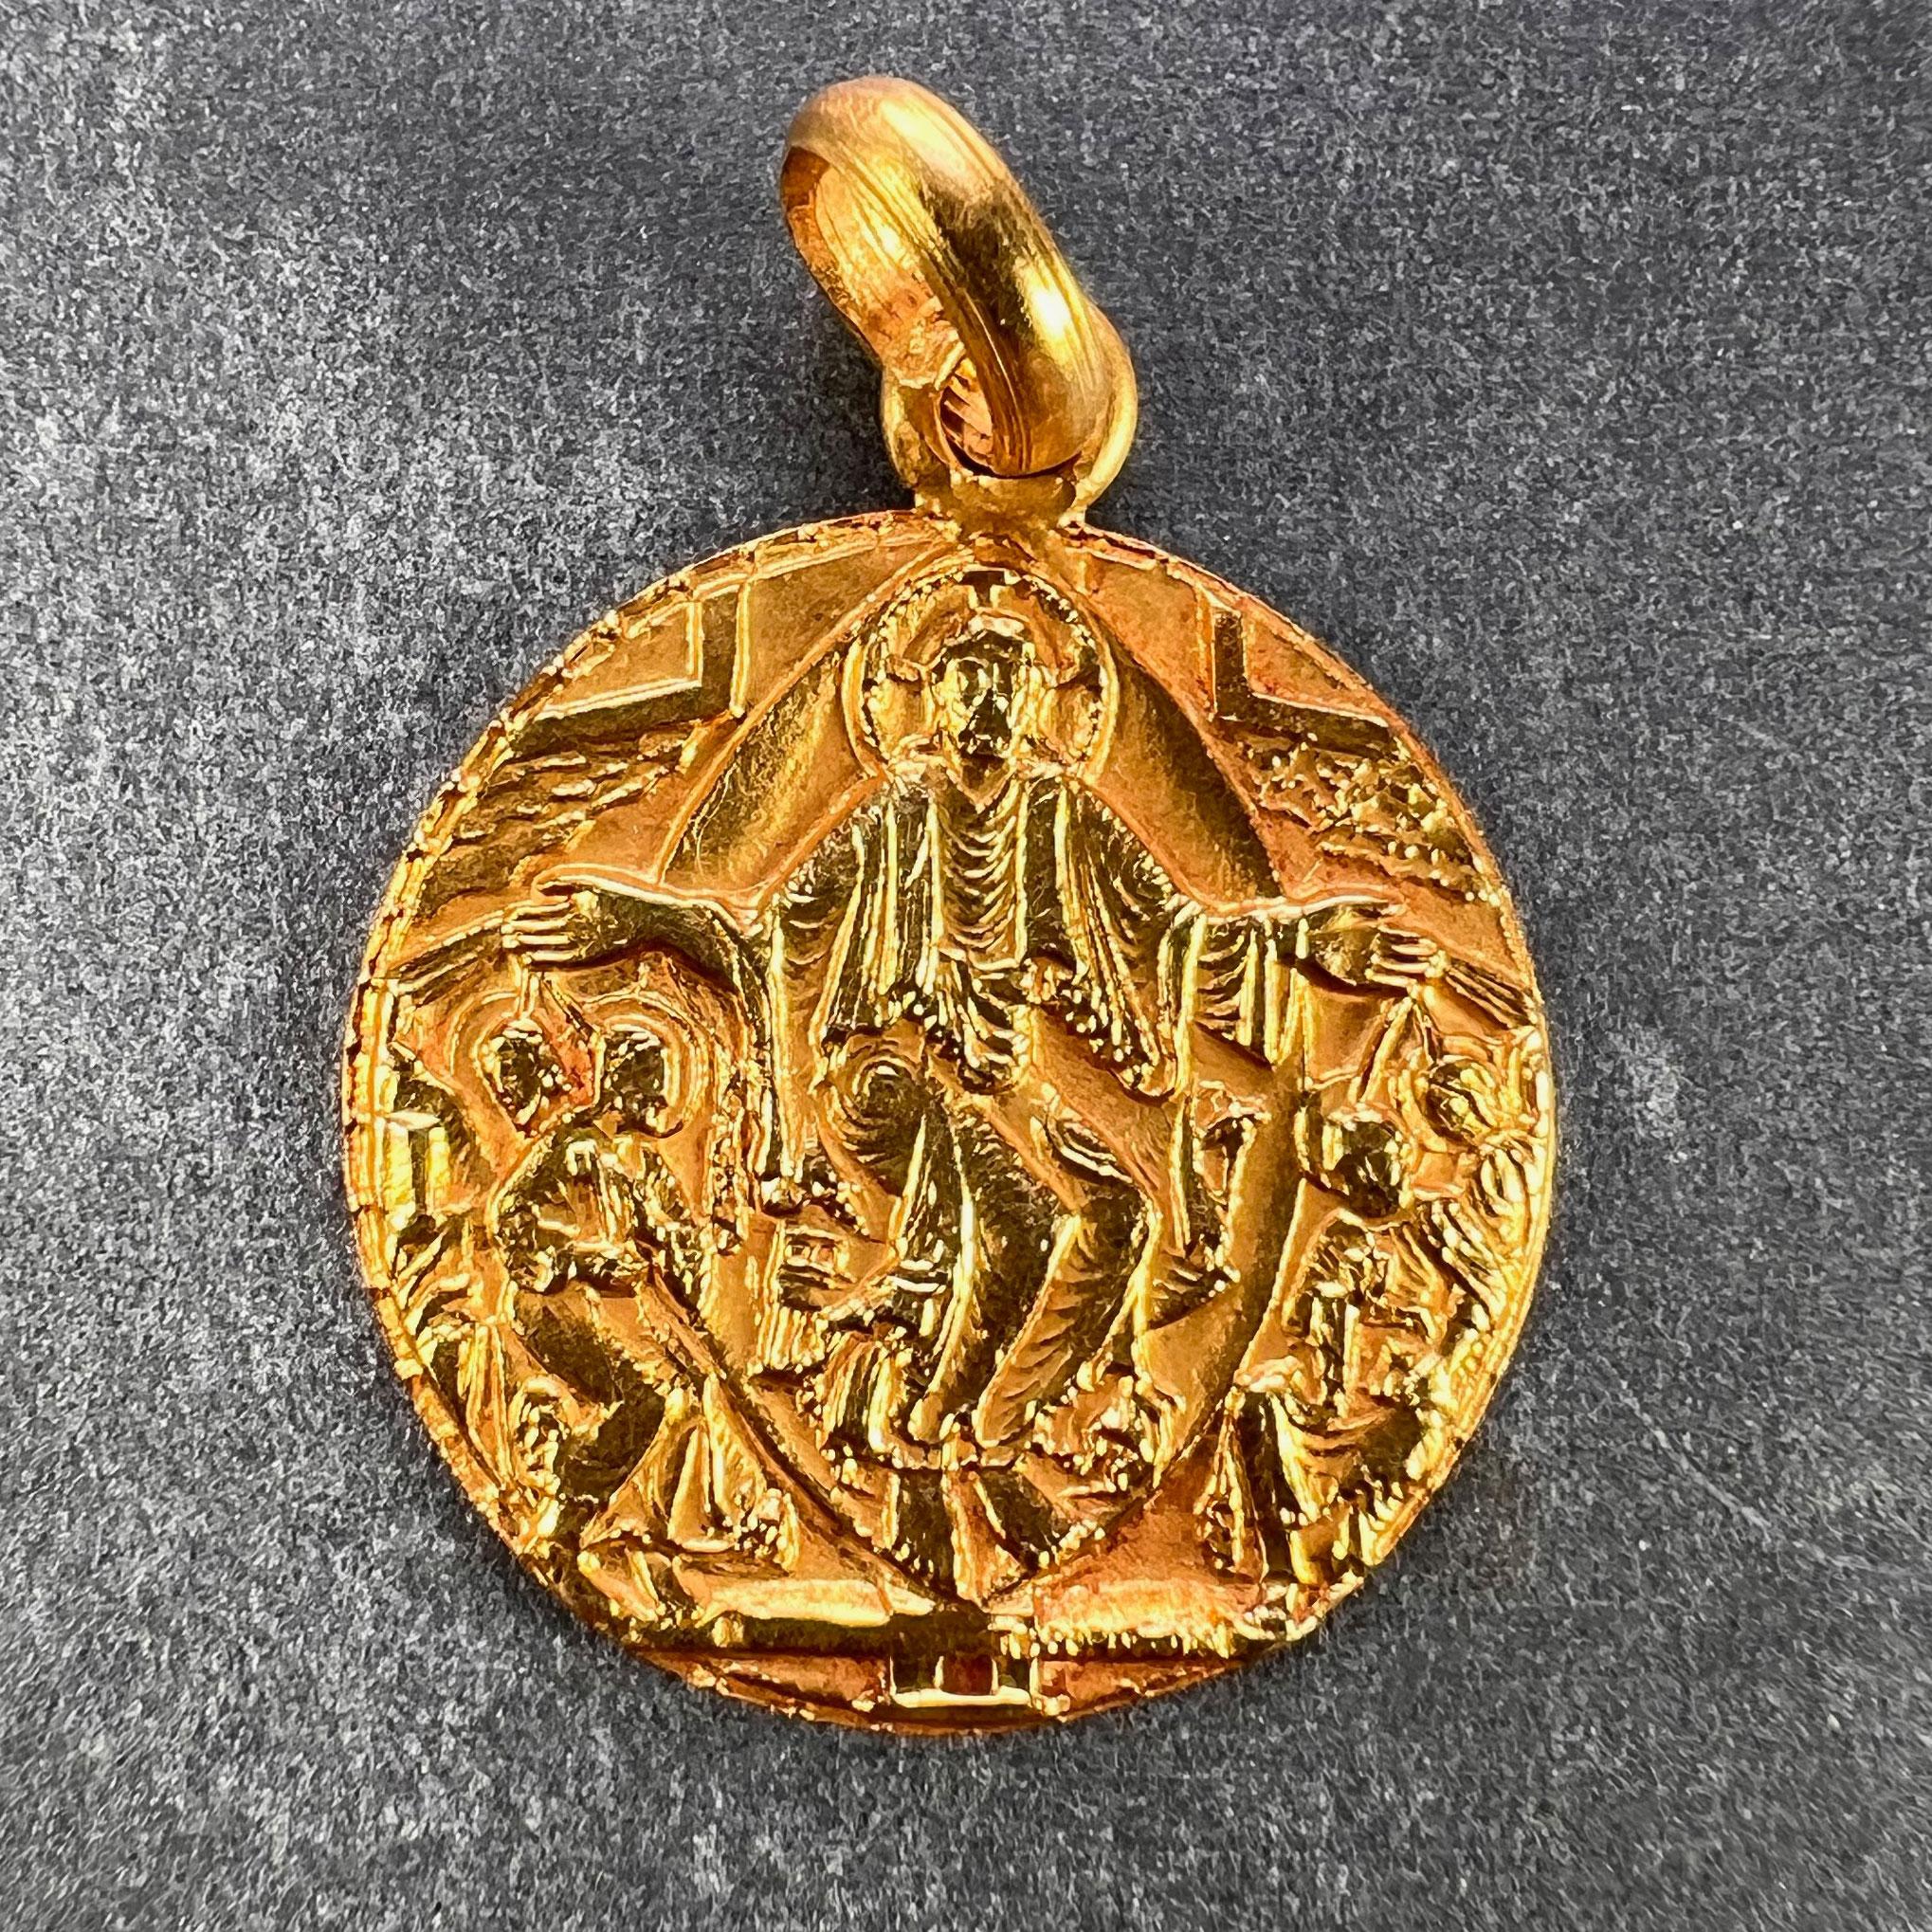 A French 18 karat (18K) yellow gold pendant designed as a medal depicting Jesus Christ on a throne in the heavens surrounded by angels. Stamped with the eagle’s head for 18 karat gold and French manufacture with an unknown makers mark. 

Dimensions: